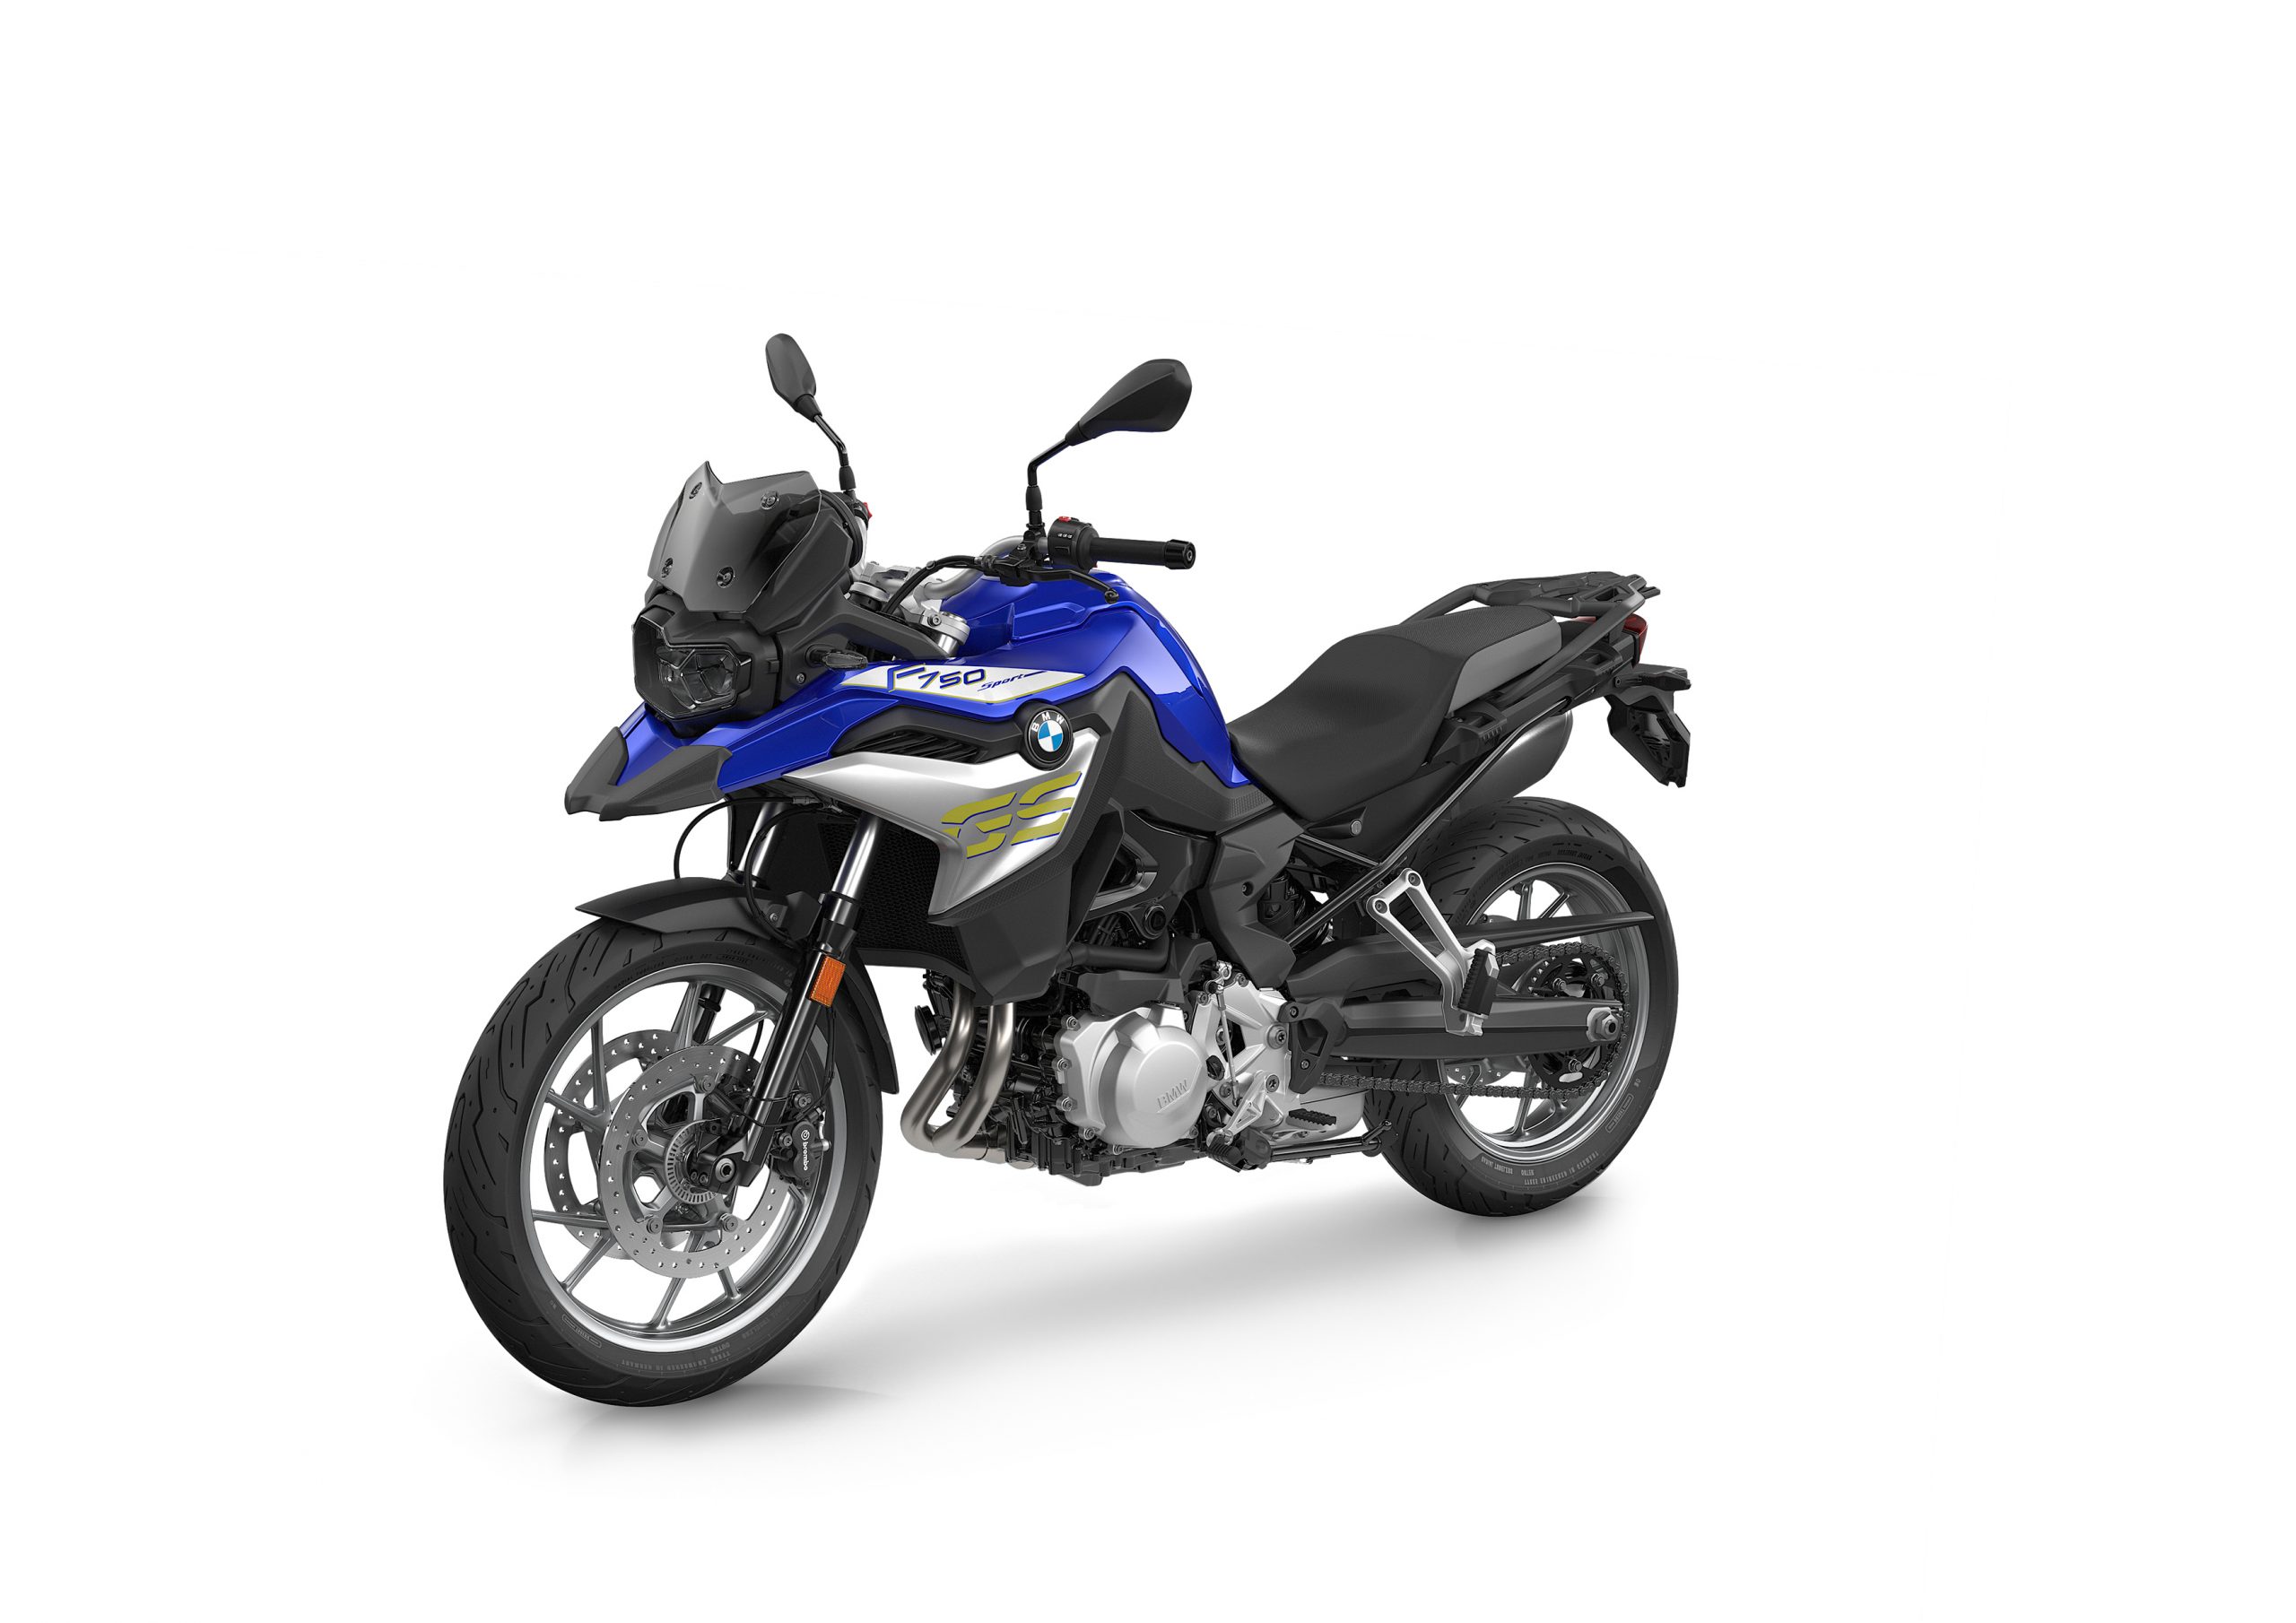 BMW F750Gs 2021 Overview